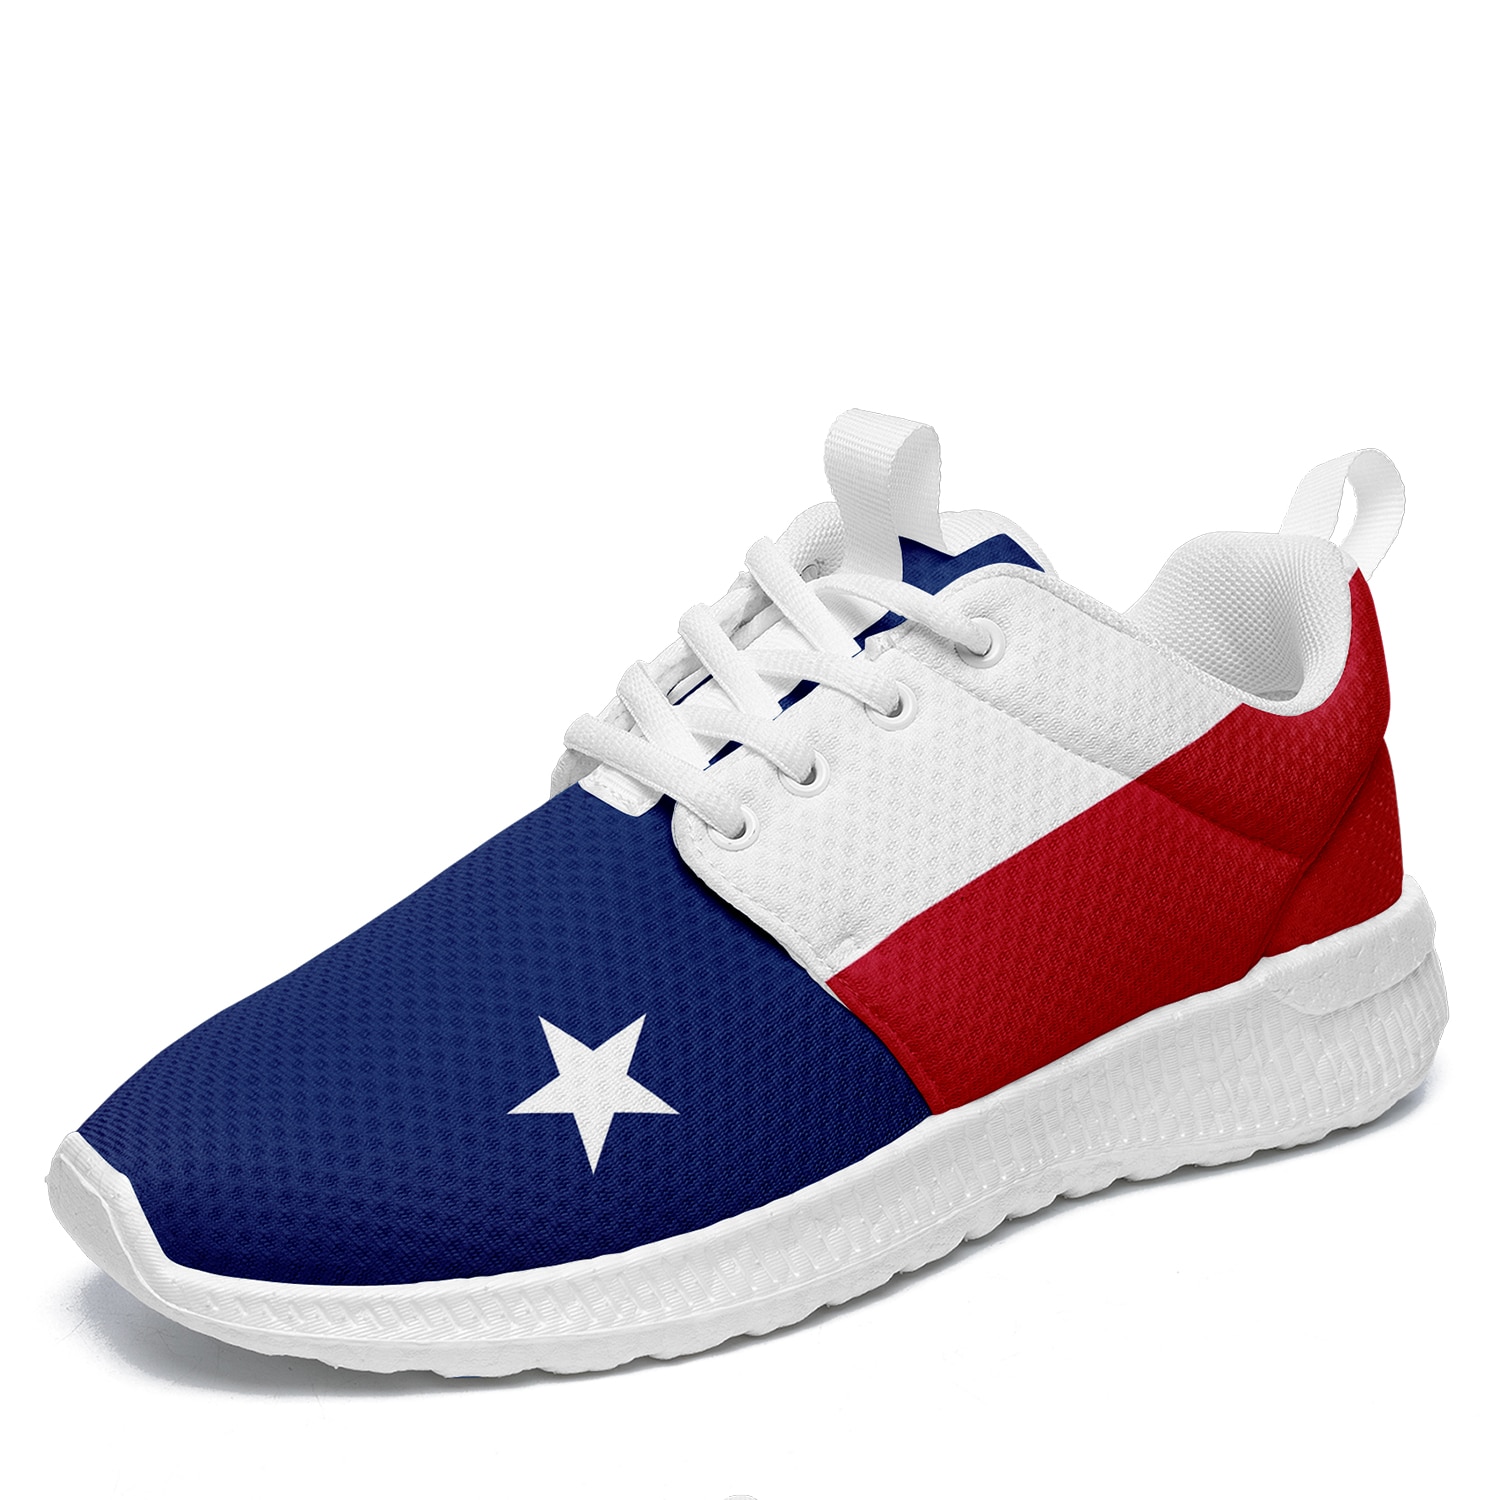 America USA Patriotic Flag Shoes Print On Demand Drop shipping Athletic Running Walking Slip-on Men's Lightweight Sneakers